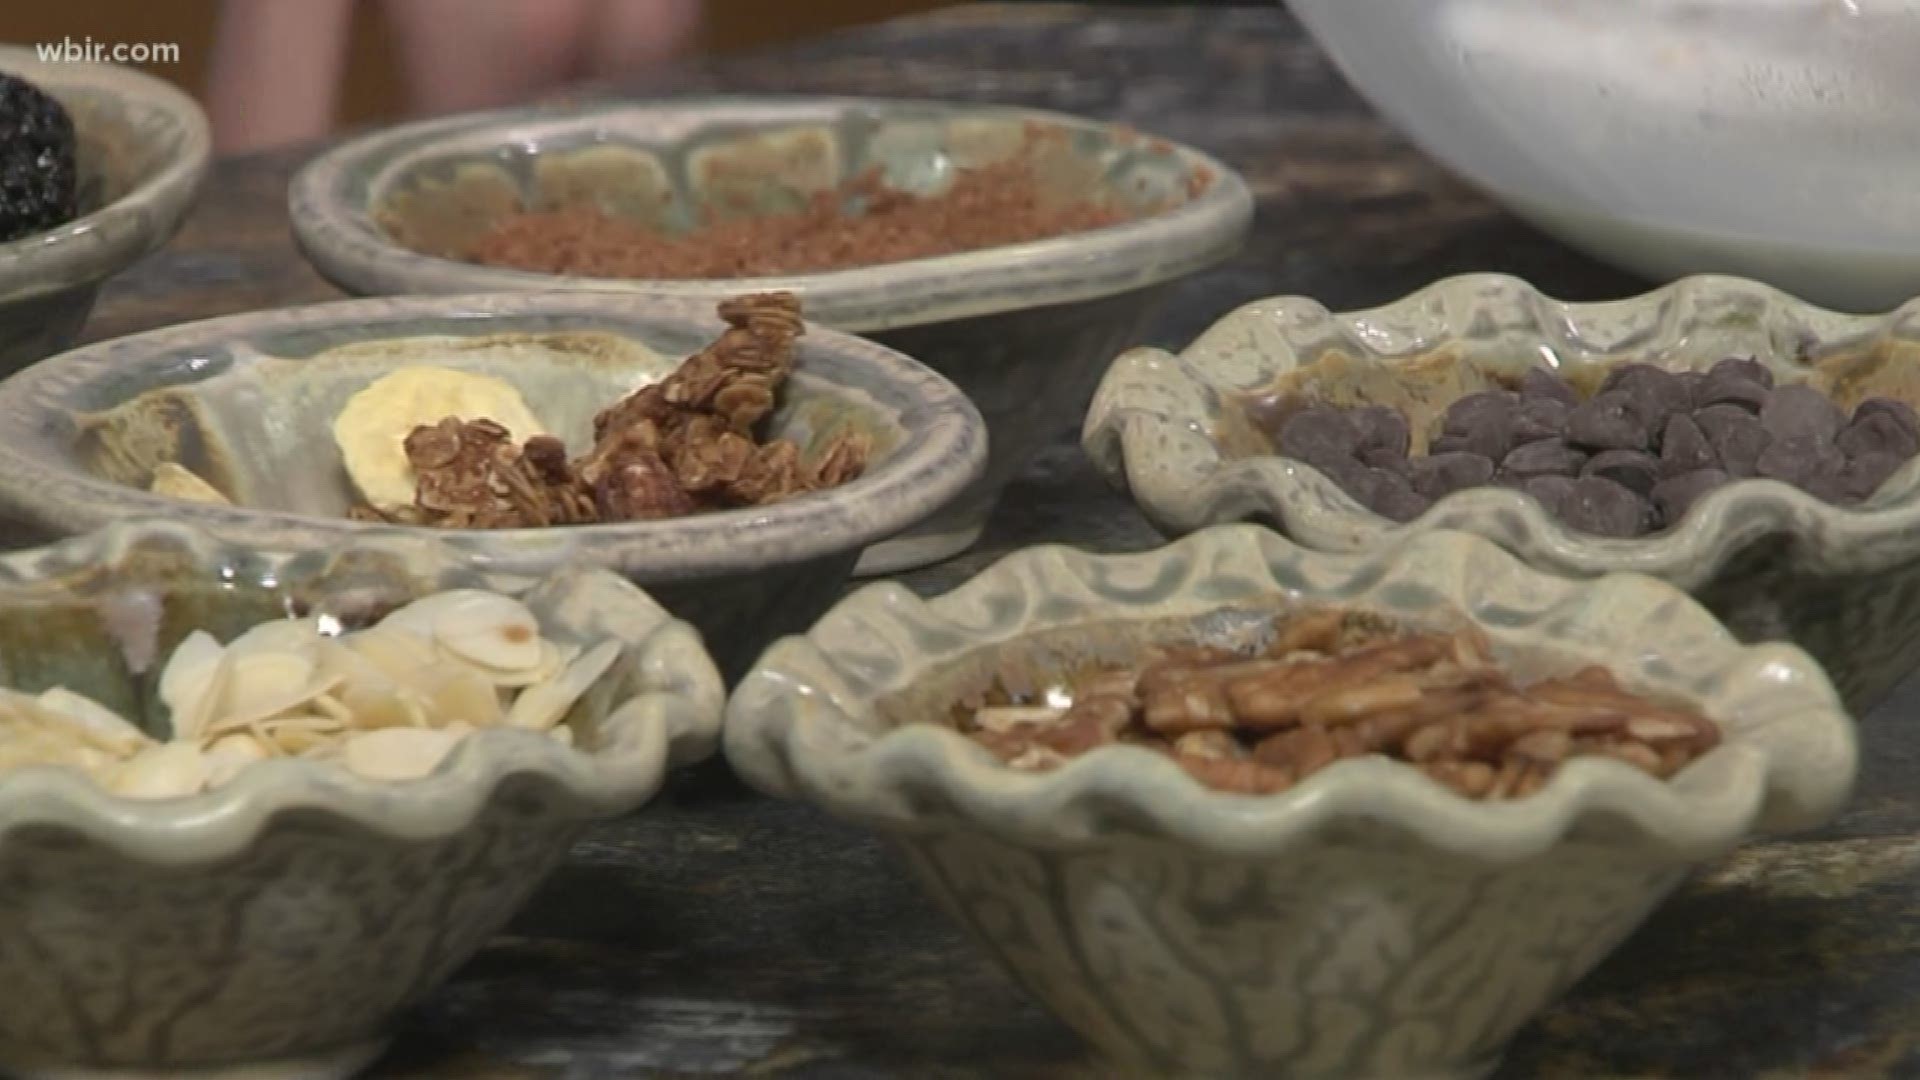 Danielle Speelman from The Old Mill in Pigeon Forge explains how to make overnight oats for breakfast.